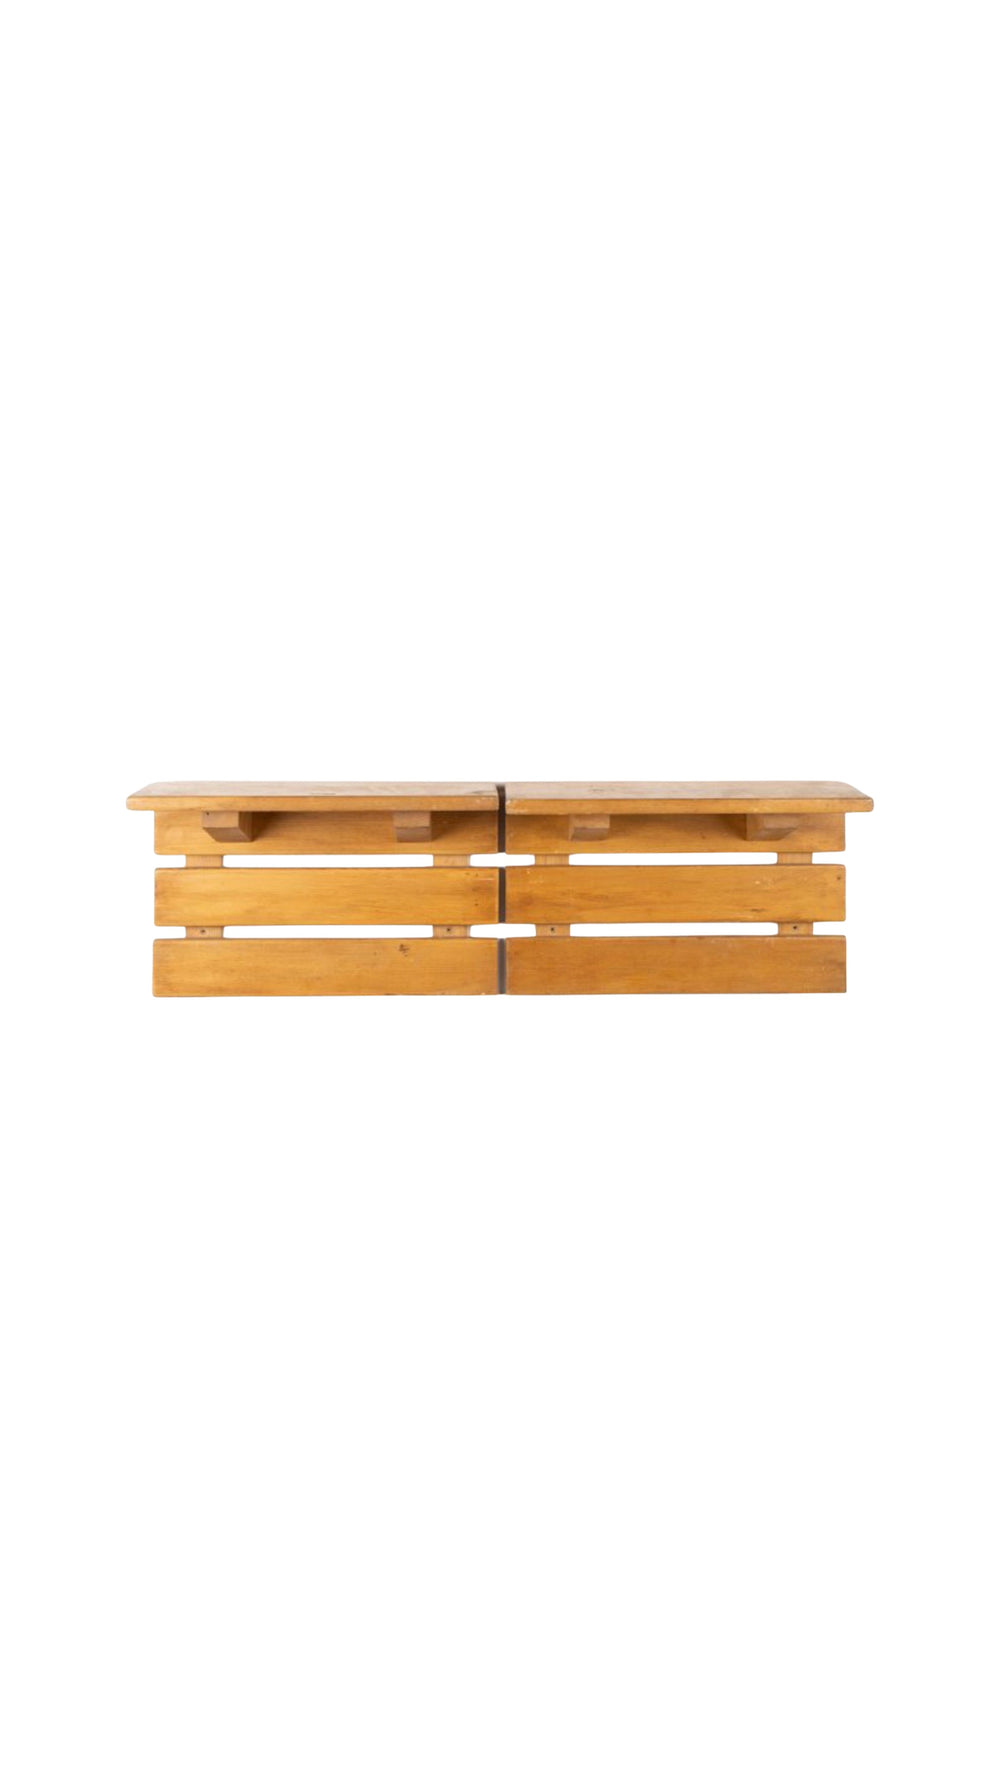 Charlotte Perriand pair of wall shelves for Les Arcs, France, 1960s